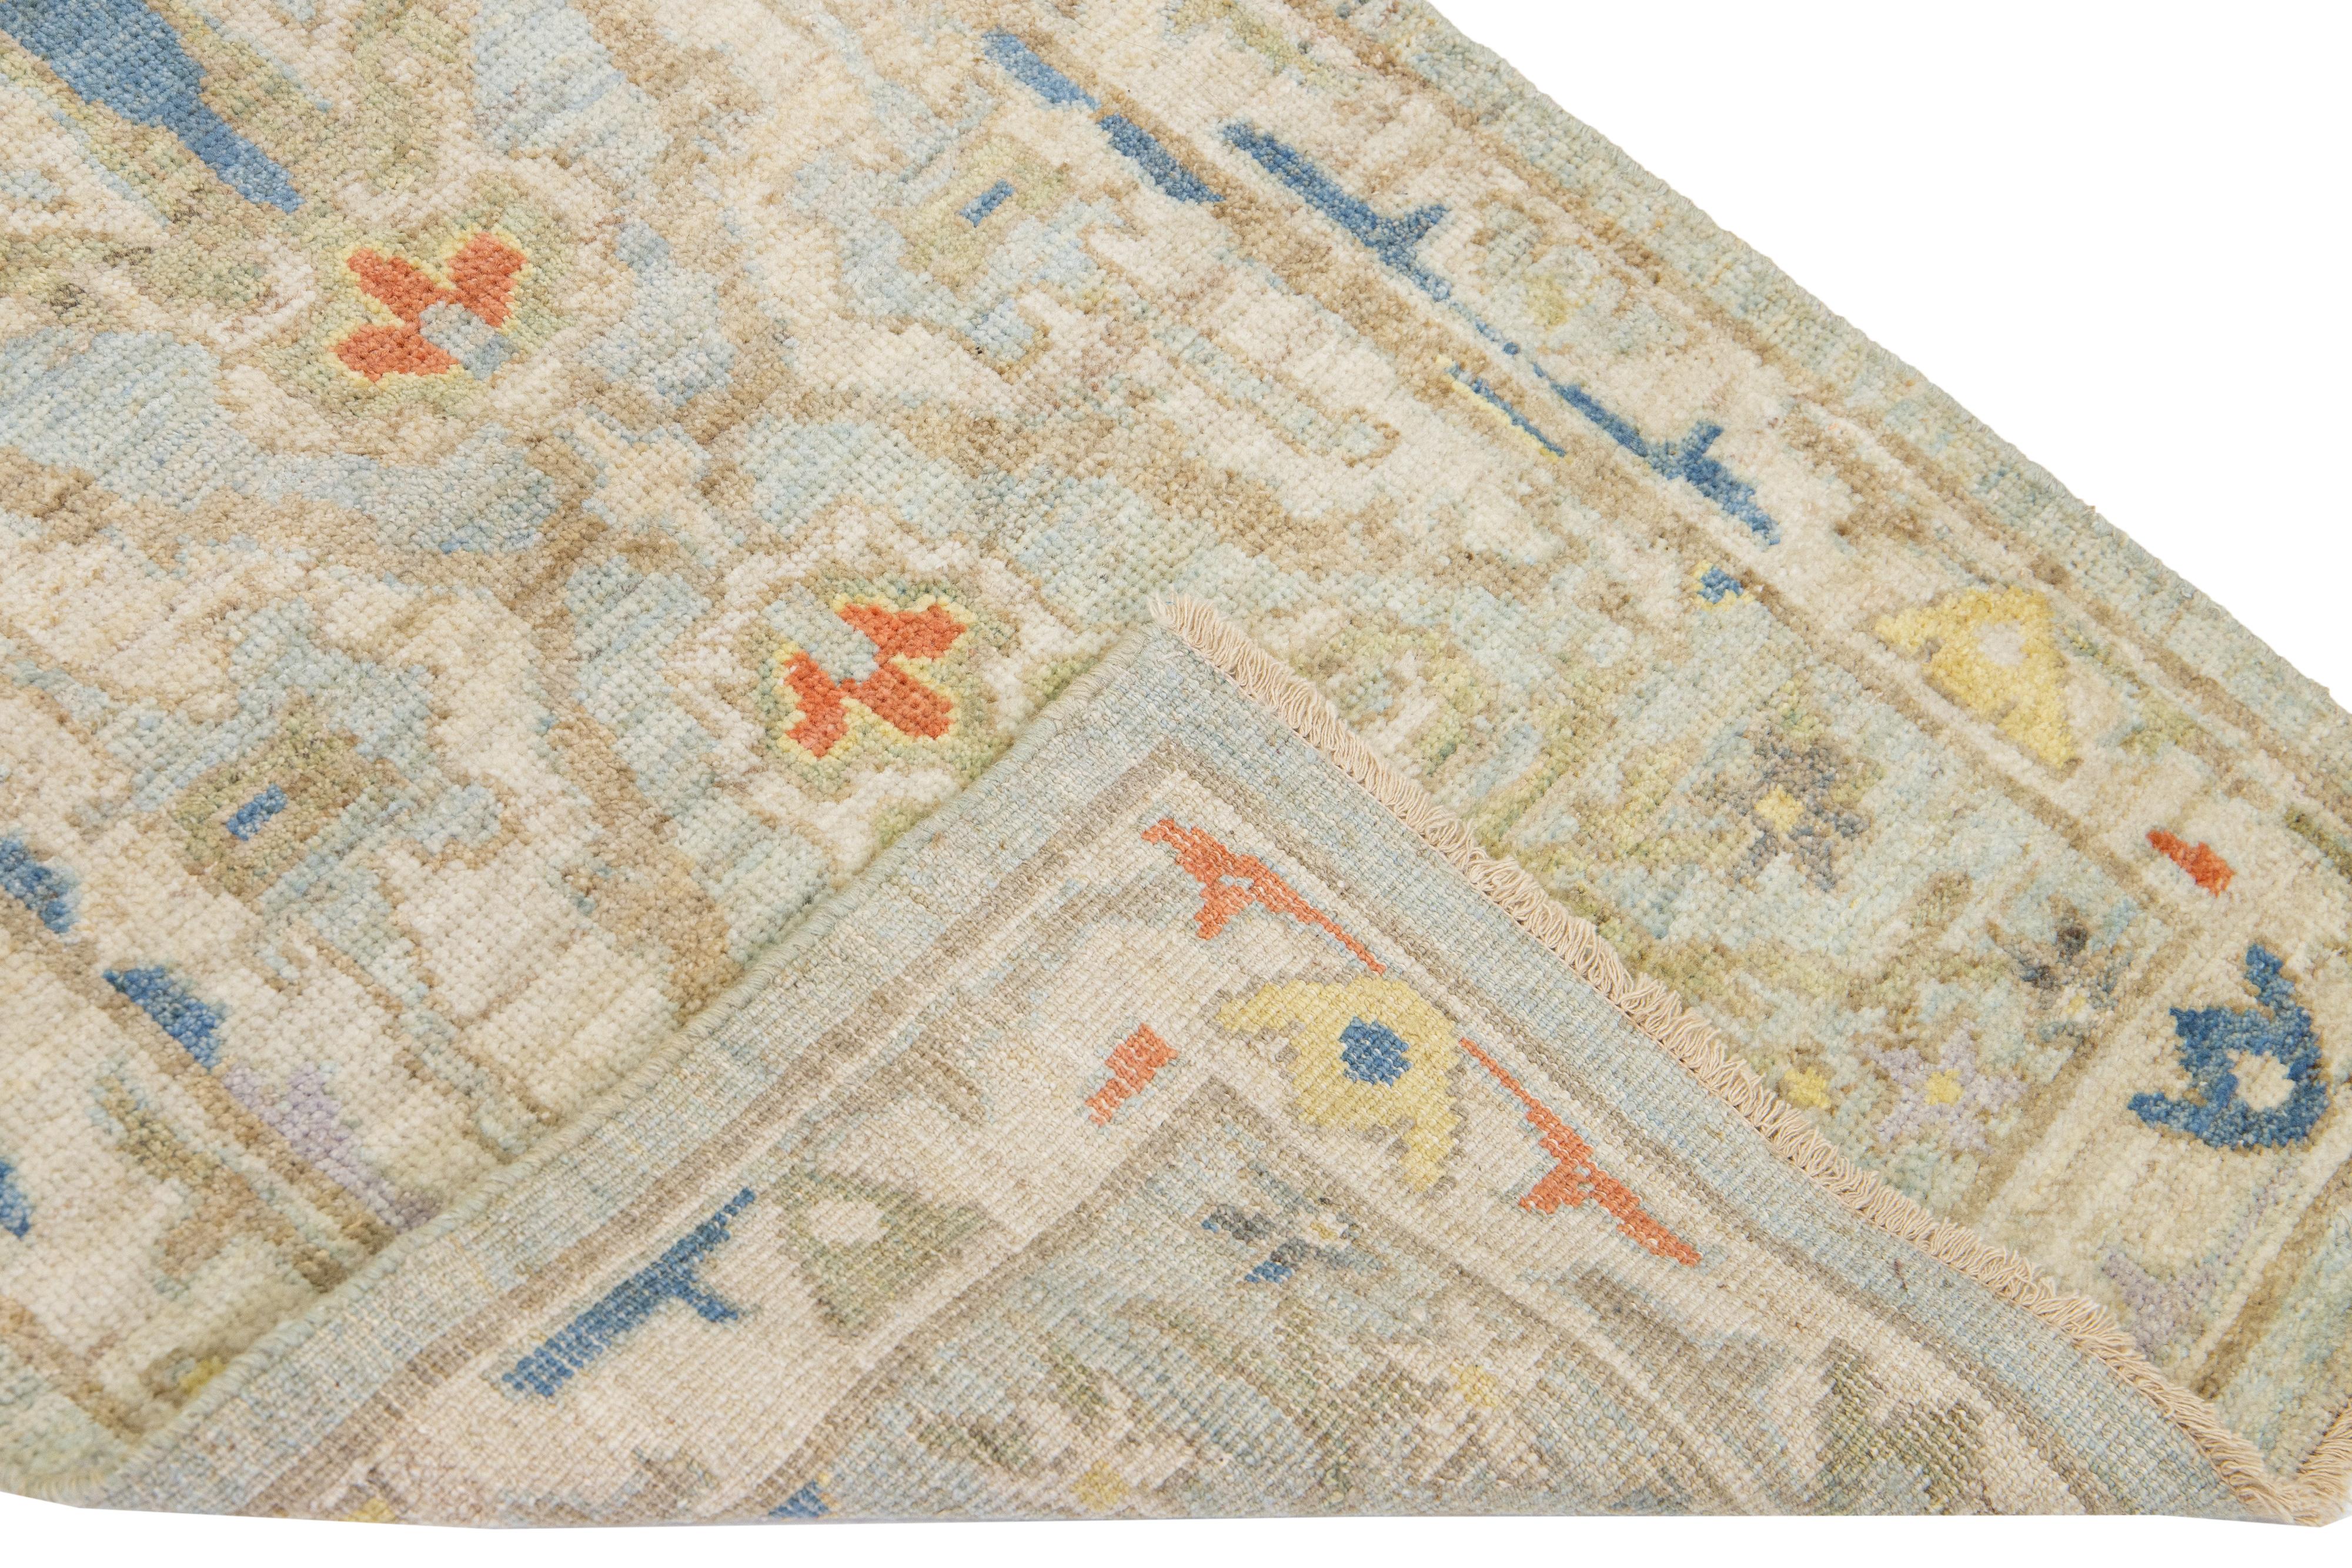 Beautiful modern Mahal hand-knotted wool runner with a blue field. This Piece has multicolor accent colors in a gorgeous all-over Classic floral design.

This rug measures: 2'8